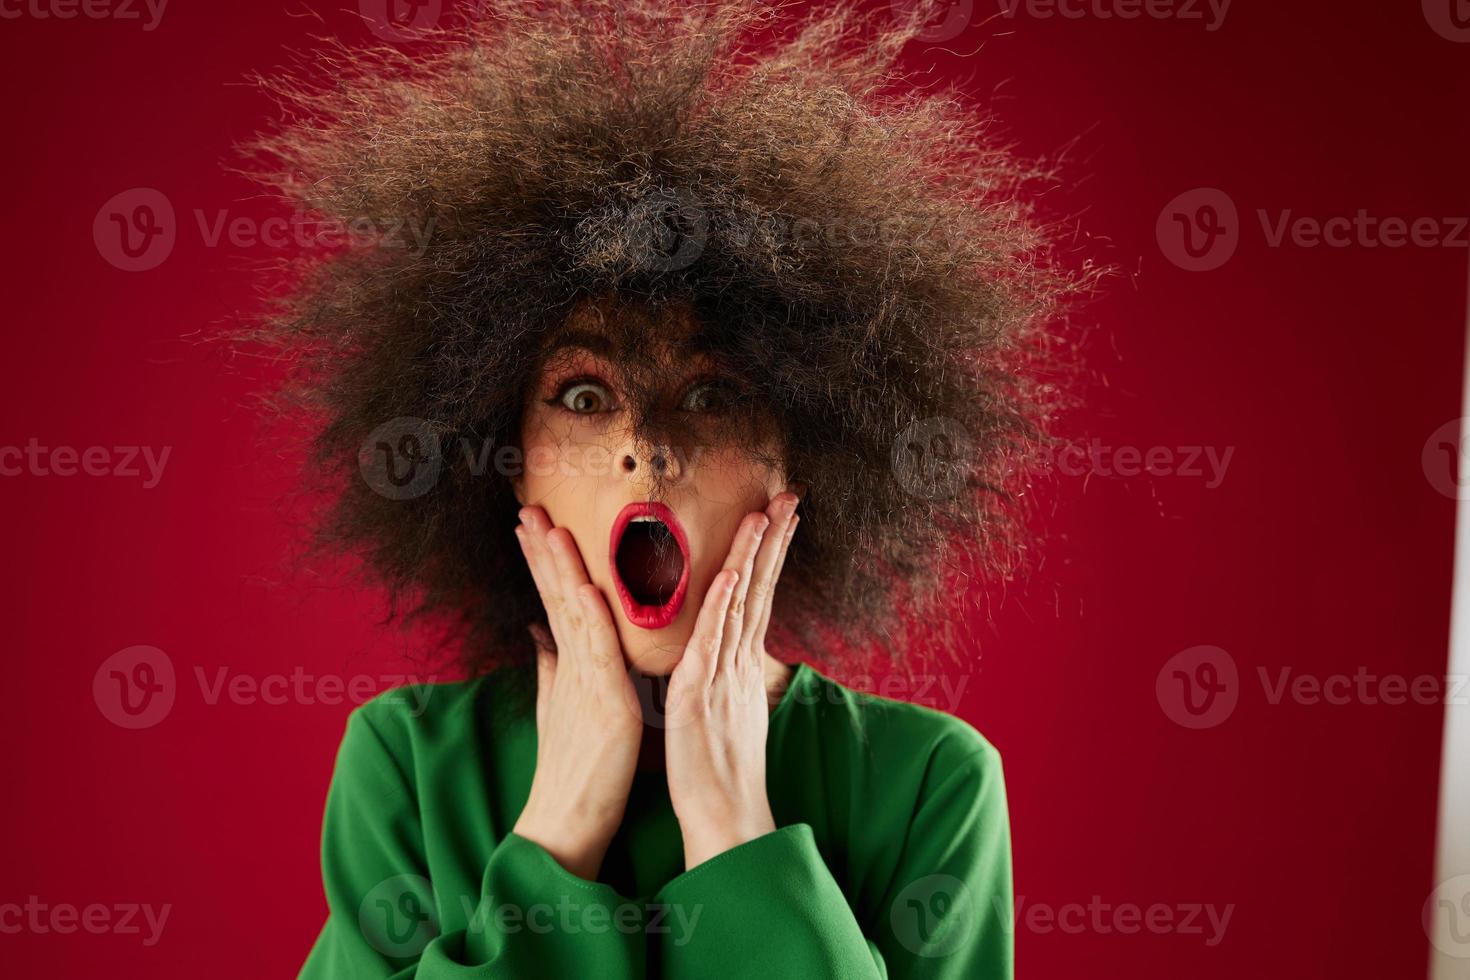 Beauty Fashion woman Afro hairstyle green dress emotions close-up red background unaltered photo